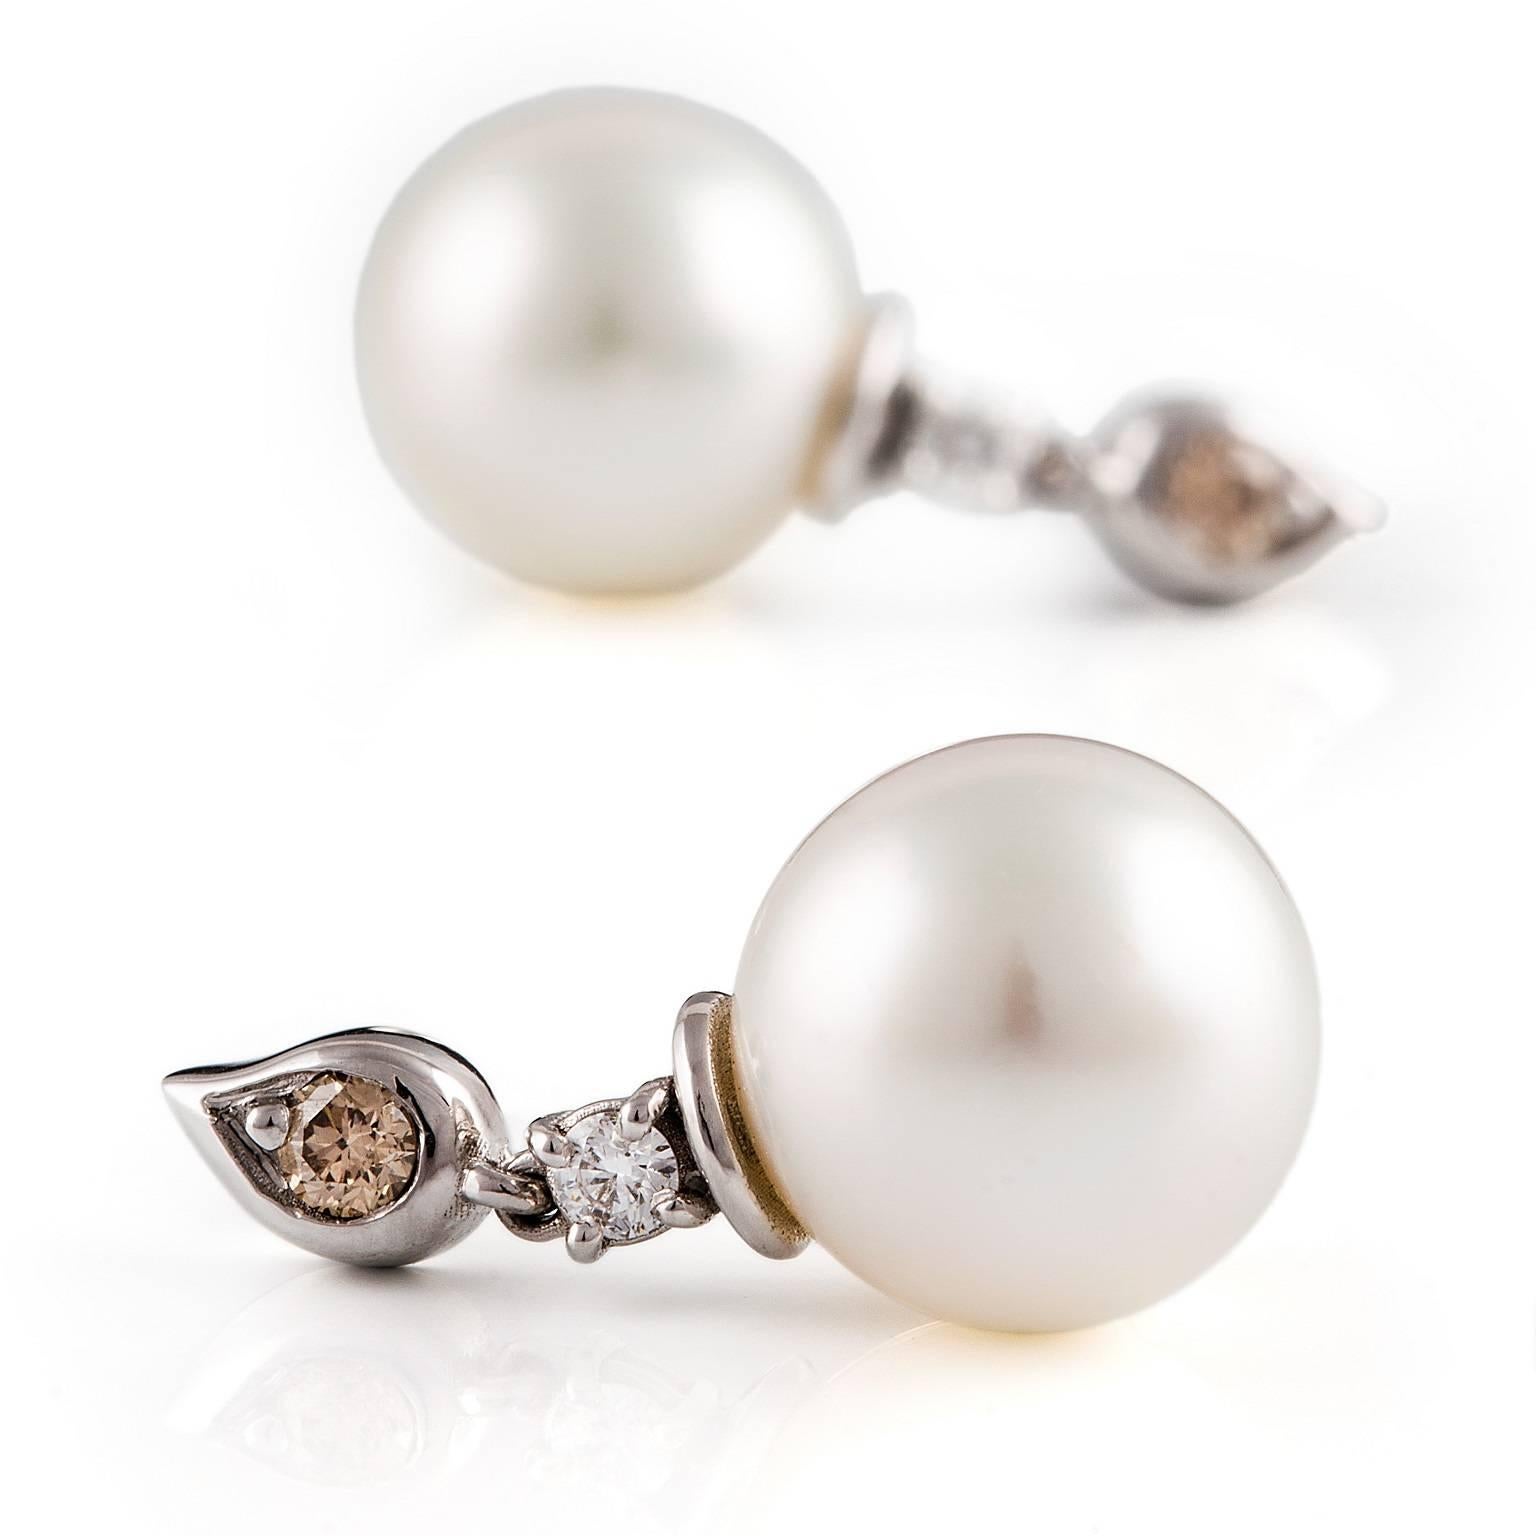 Tear Drop Perla Earrings

These exquisite earrings are set with a stunning pair of South Sea pearls, a white diamond pair and a cognac diamond pair that are contained within the fancy tear drop motifs. 

South Sea pearls: white color, high luster,